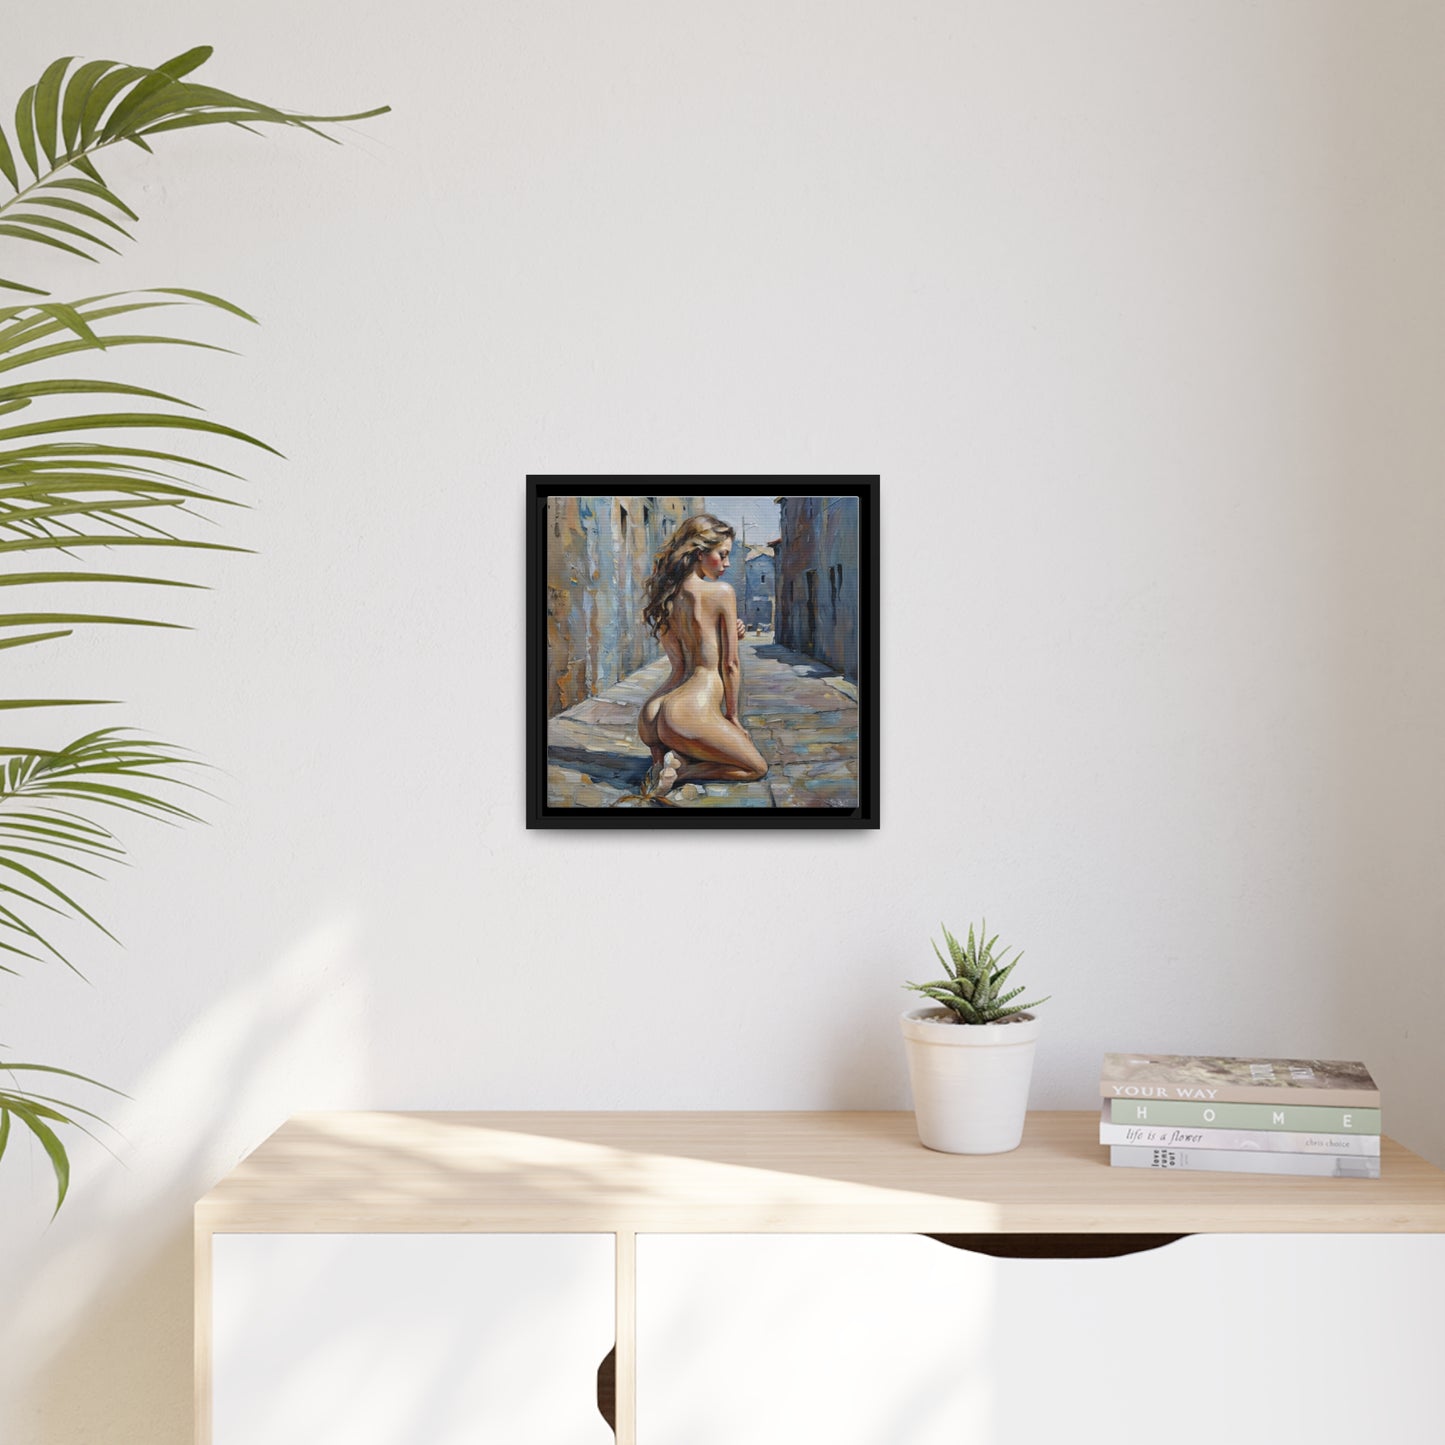 Contemplative Beauty in Old Town, Modern Figurative Art Canvas, Urban Elegance Nude Painting, Expressive Female Form Wall Decor